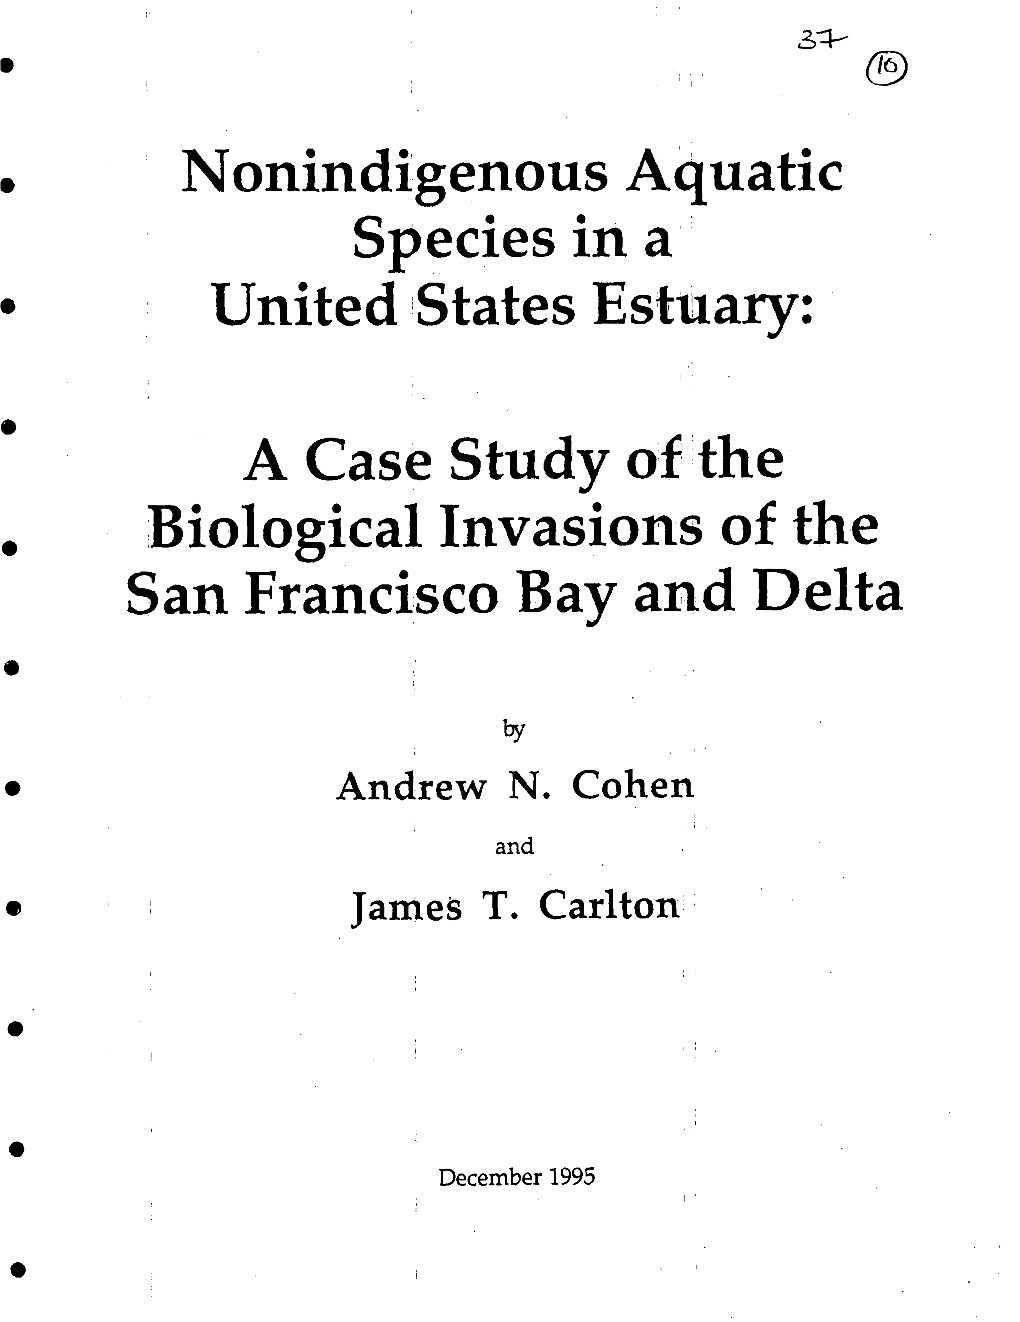 Nonindigenous Aquatic Species in United States Estuary: a Case Study of the Biological Invasions Of